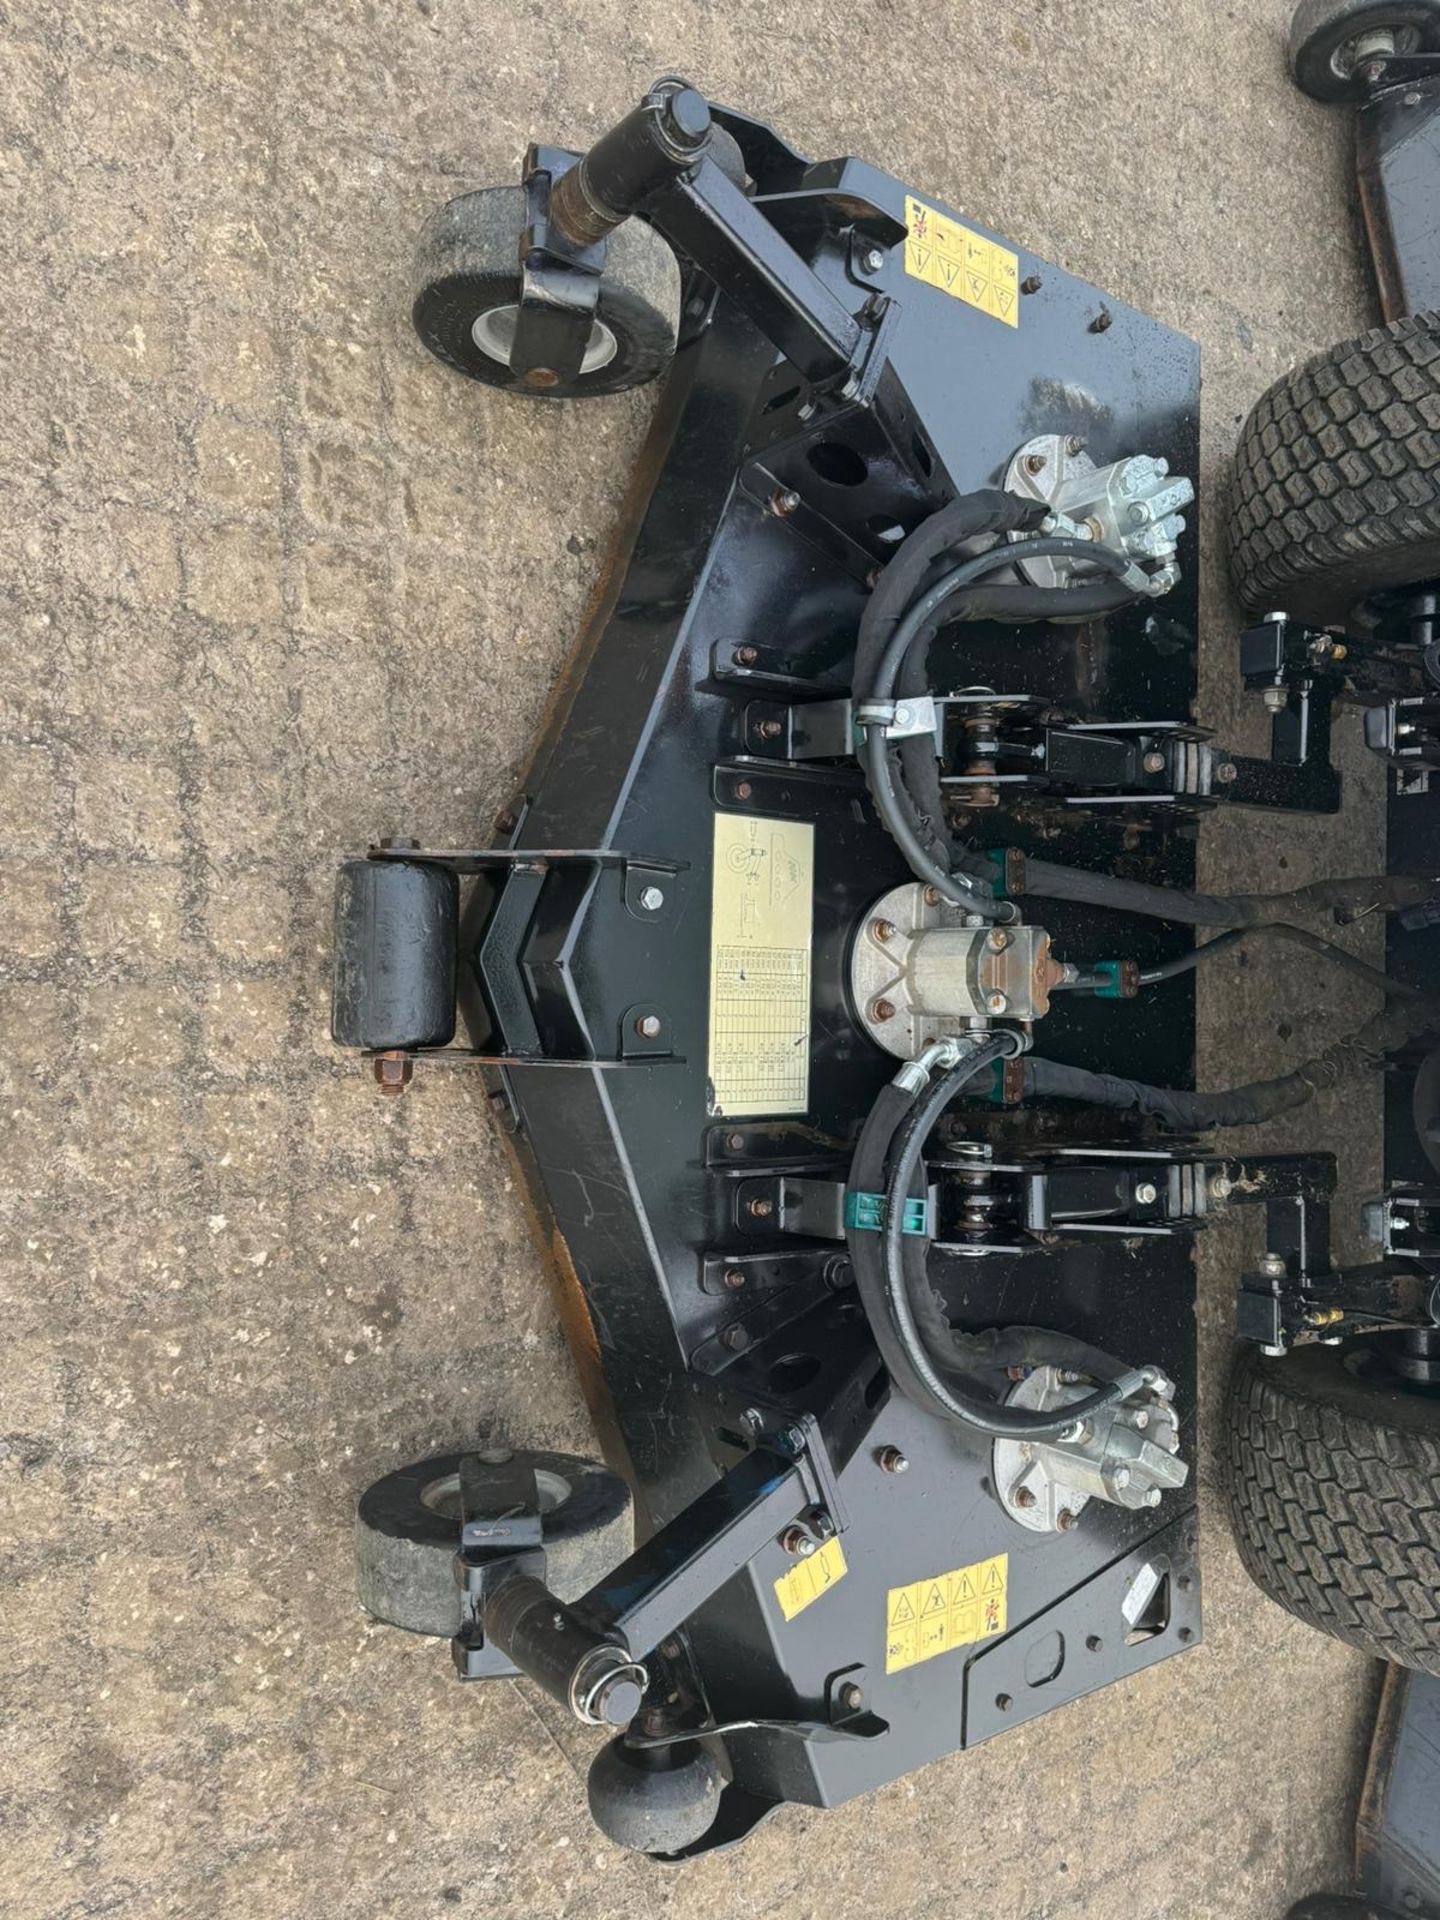 2016 RANSOMES RMP493 BATWING RIDE ON LAWN MOWER WITH FULL GLASS CAB *PLUS VAT* - Image 3 of 33